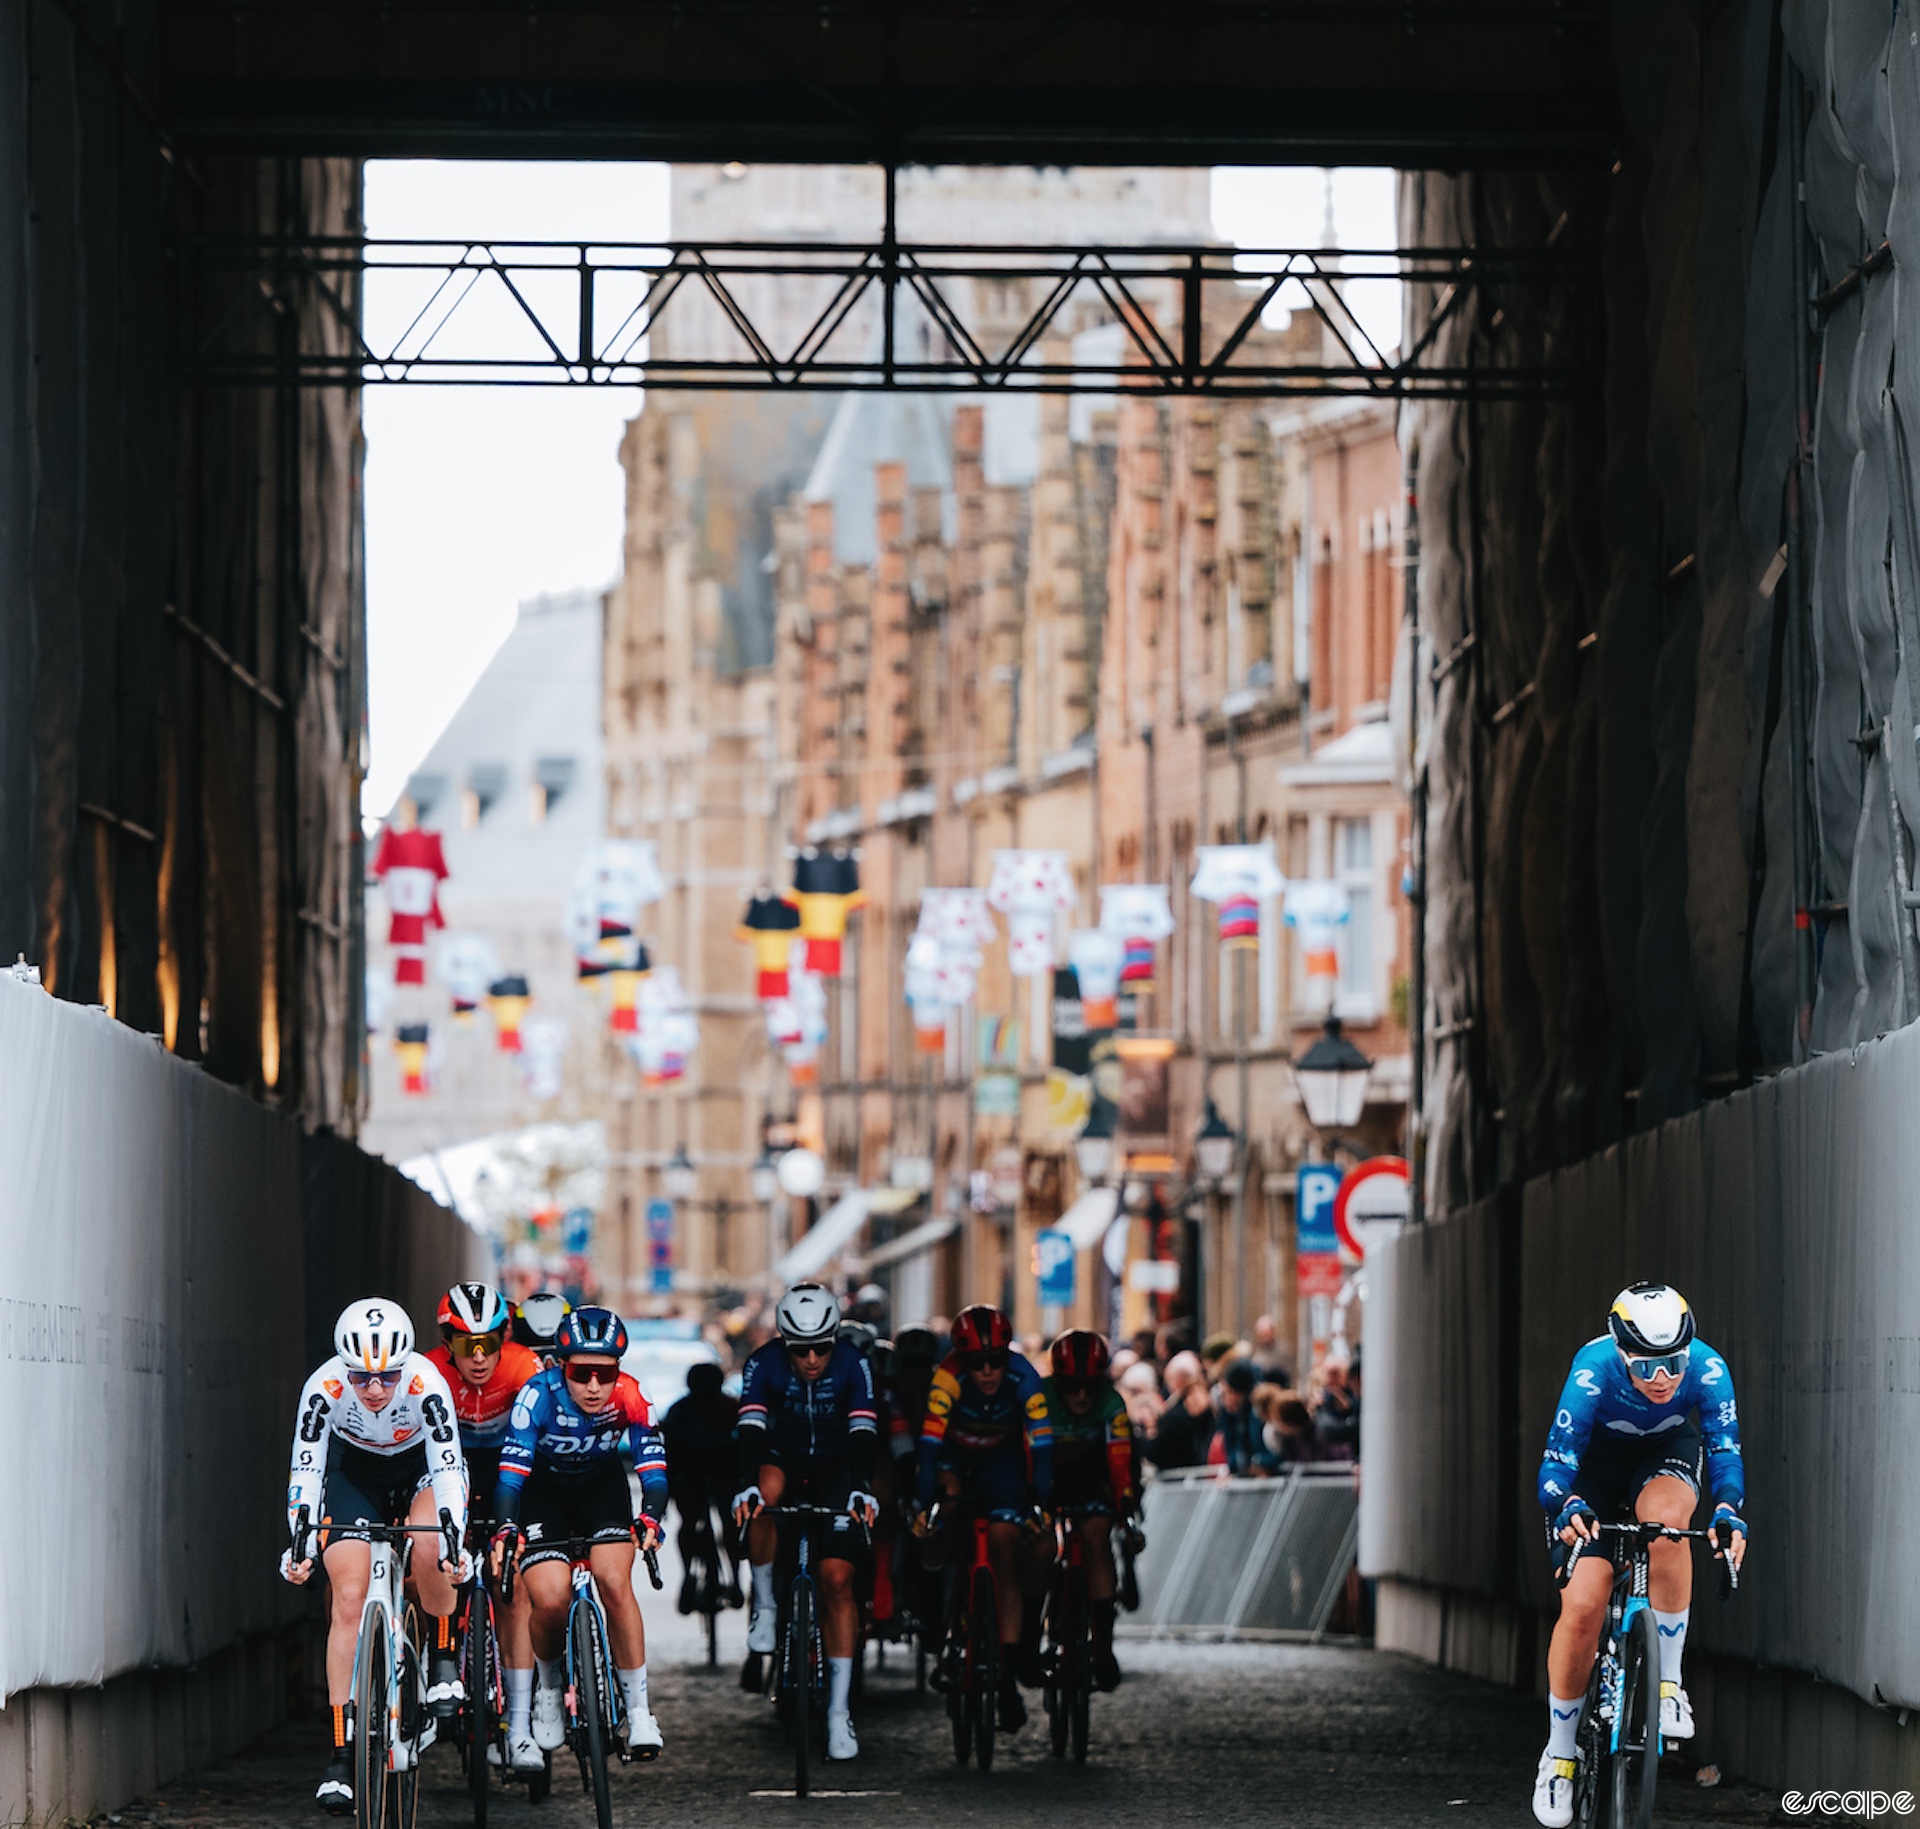 Emma Norsgaard attacks late in Gent-Wevelgem. She rides alone under a large scaffolding on a bridge. The other riders aren't looking at her yet.